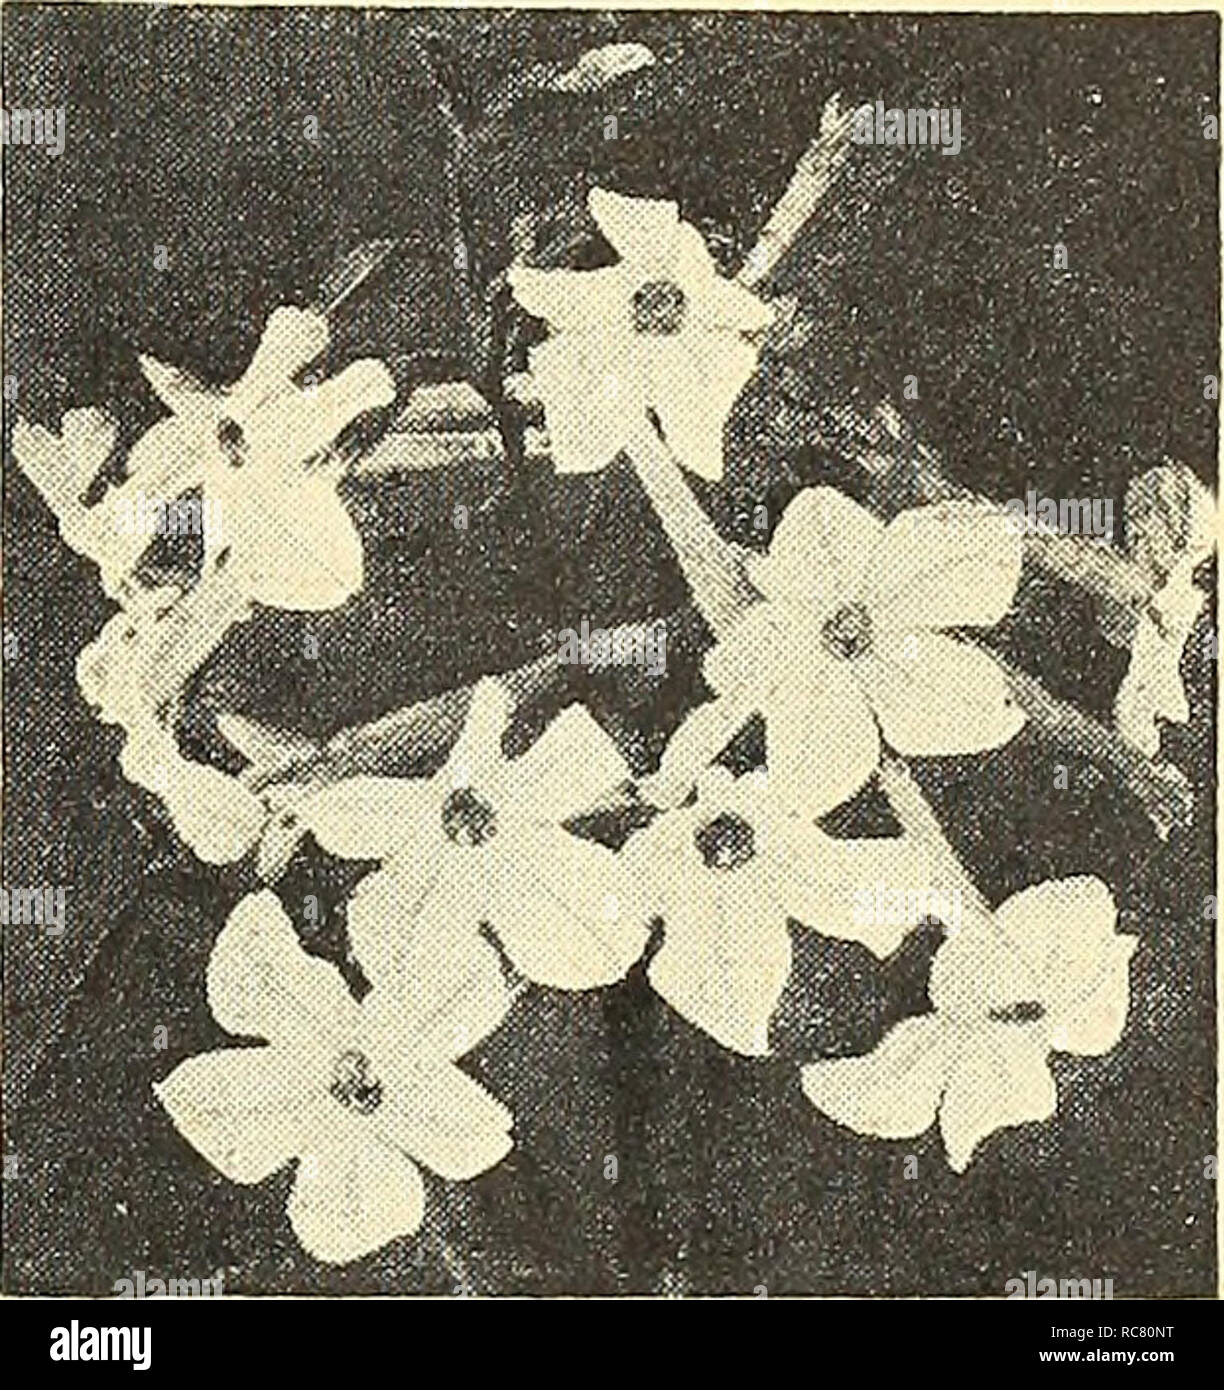 . Dreer's garden book for 1945. Seeds Catalogs; Nursery stock Catalogs; Gardening Equipment and supplies Catalogs; Flowers Seeds Catalogs; Vegetables Seeds Catalogs; Fruit Seeds Catalogs. Nemophila—Baby Blue Eyes Nemophila ® ® Baby Blue Eyes 3143 Insignis, Blue. A charming an- nual developing into showy little plants 8 inches tall. Produces a great abundance of graceful light blue flowers and is particularly floriferous where the summers are not too warm. Easy to grow from seed sown early in the spring. Pkt. 10c; Y^ oz. 2Sc; oz. 75c. Nierembergia ® ^ 3159 Coerulea (Hippomanica) {Blue Cups). A  Stock Photo